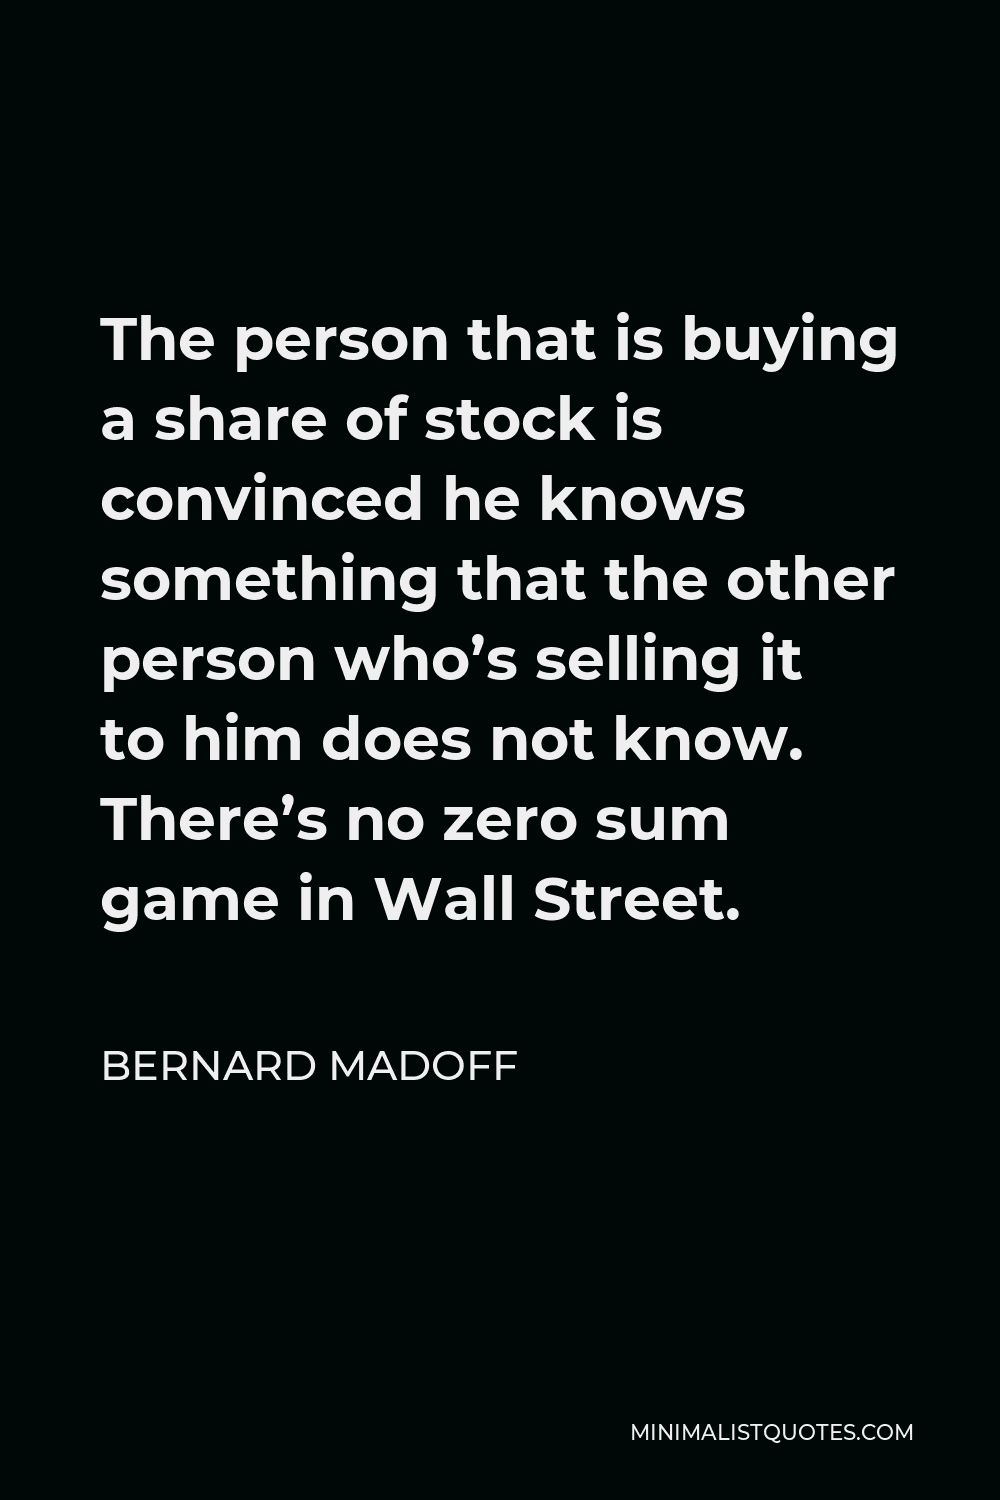 Bernard Madoff Quote - The person that is buying a share of stock is convinced he knows something that the other person who’s selling it to him does not know. There’s no zero sum game in Wall Street.